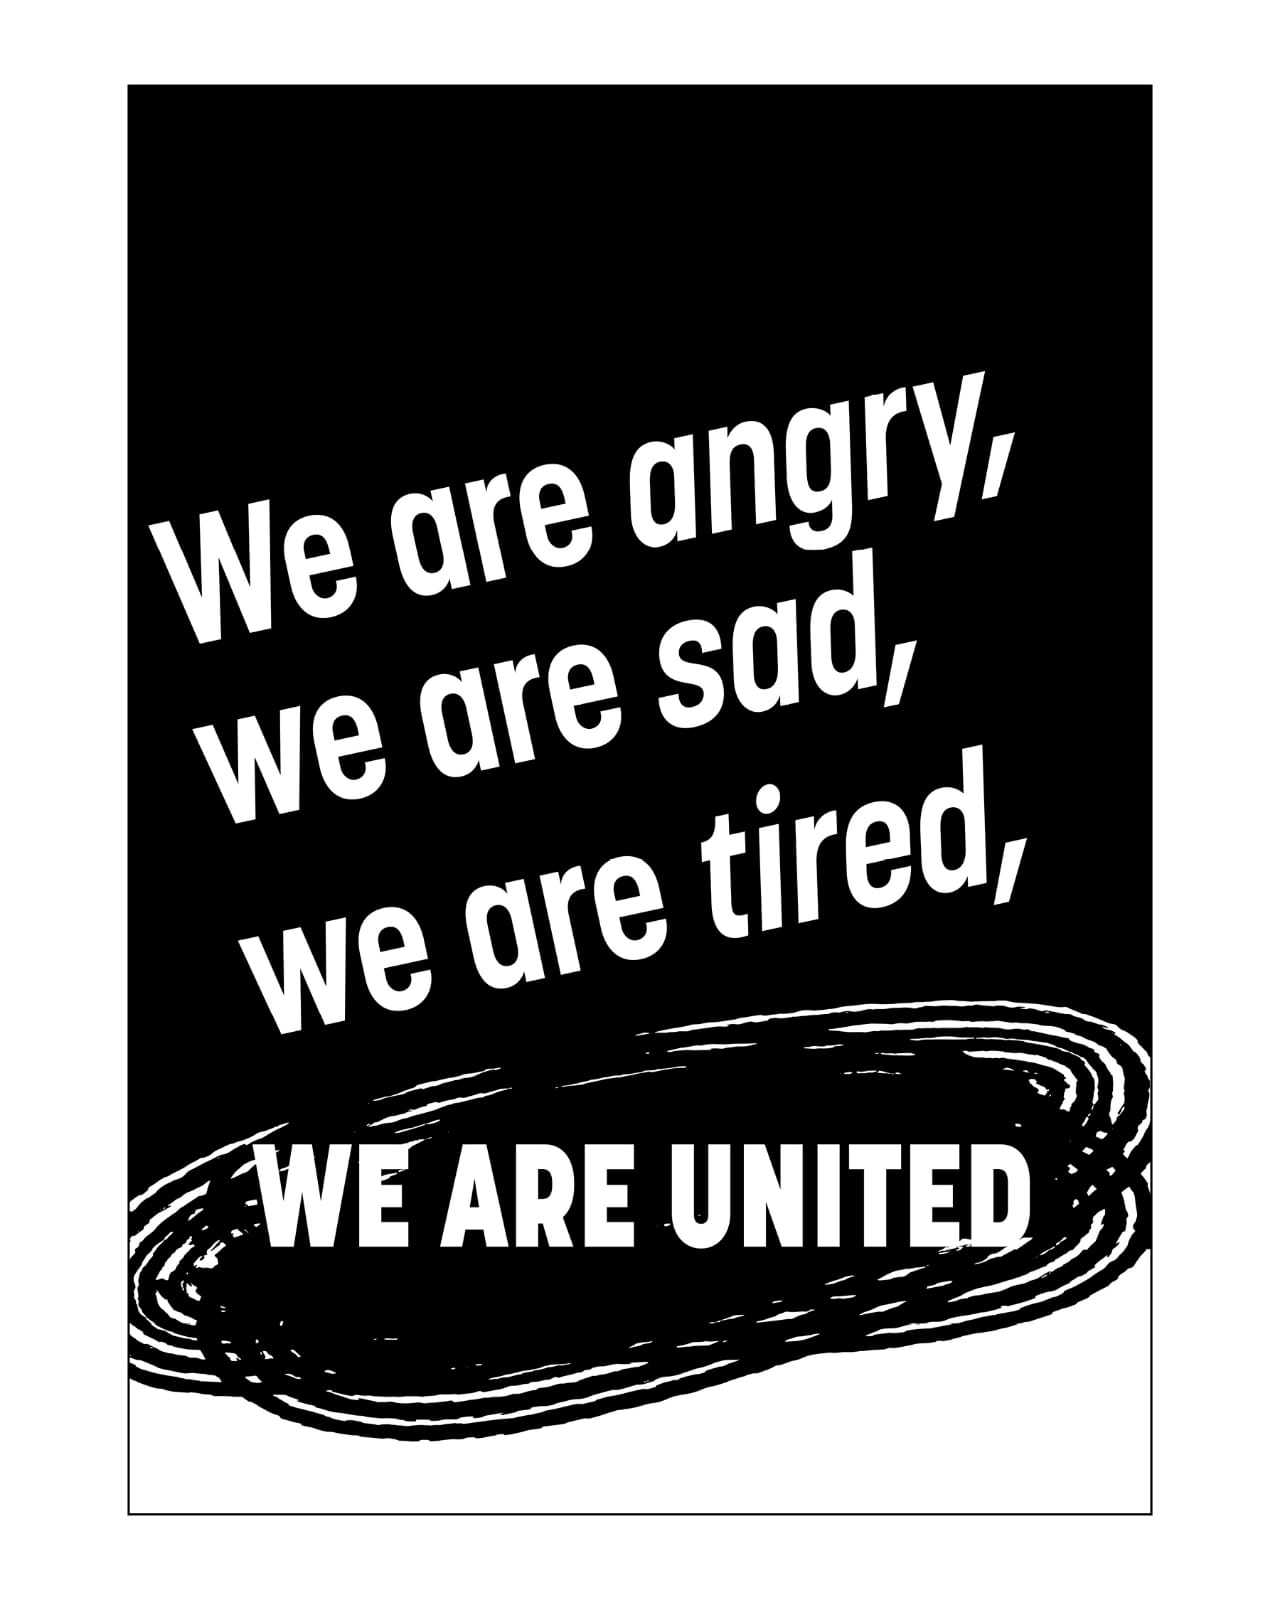 documenta 15 - we are sad, angry, tired, we are united